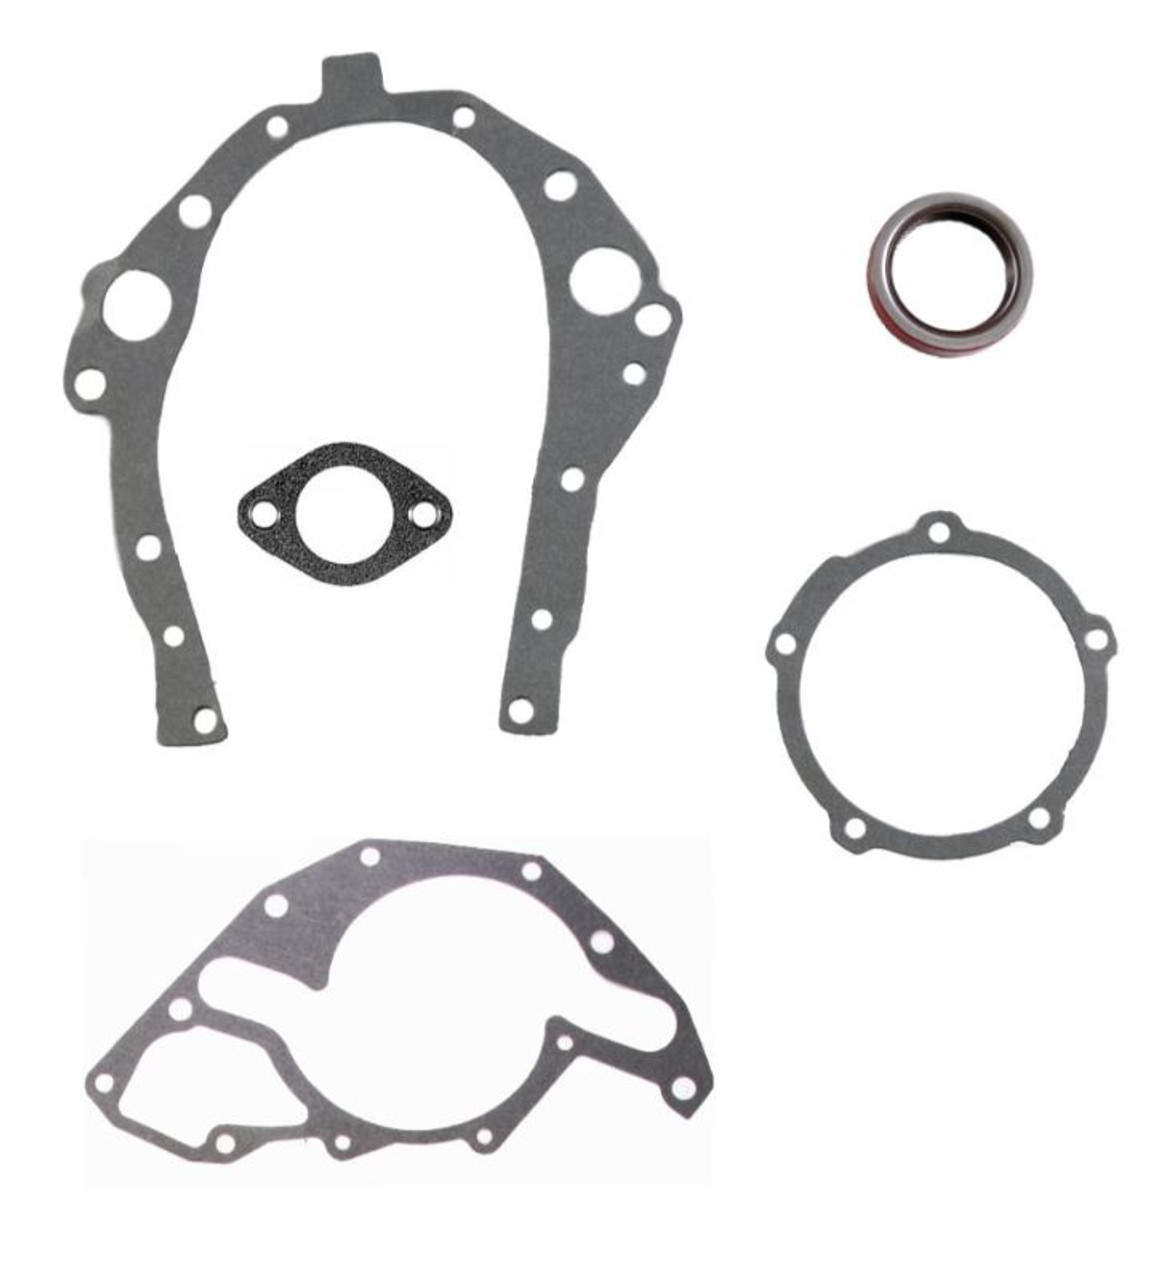 1995 Buick Century 3.1L Engine Timing Cover Gasket Set TCC189-A -133